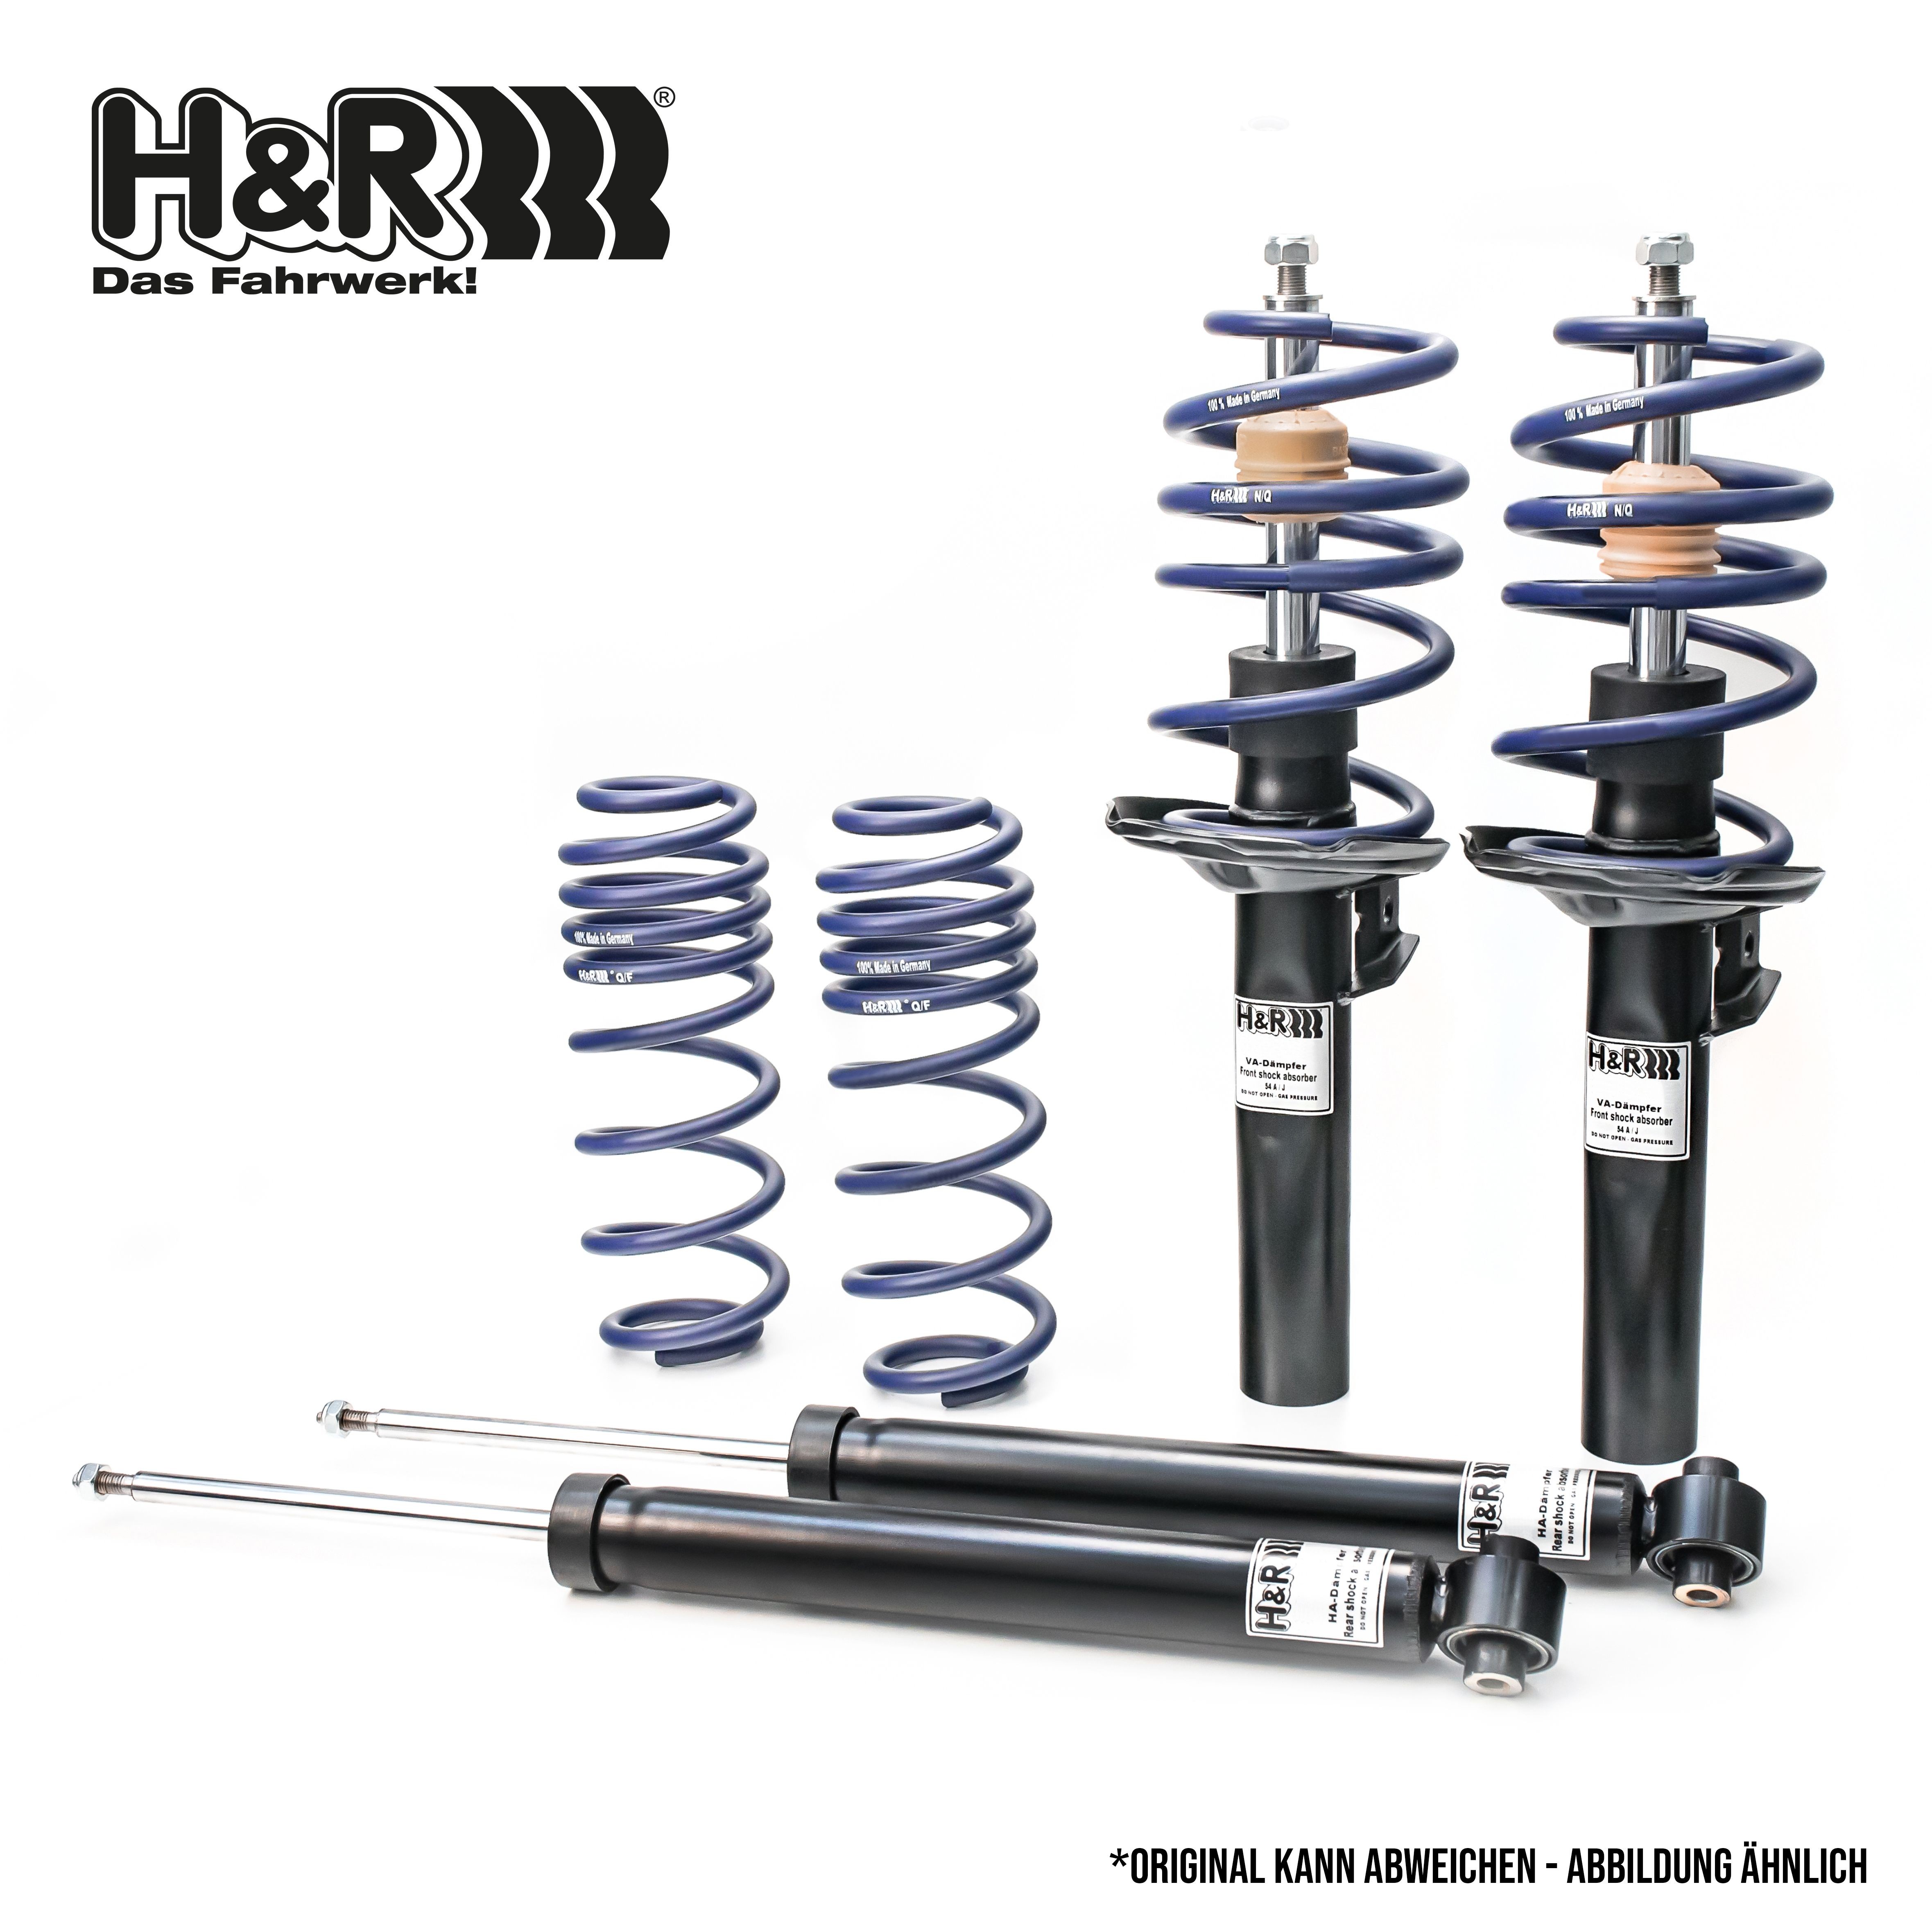 H&R 31031-1 Suspension kit, coil springs / shock absorbers Golf 4 Cabrio